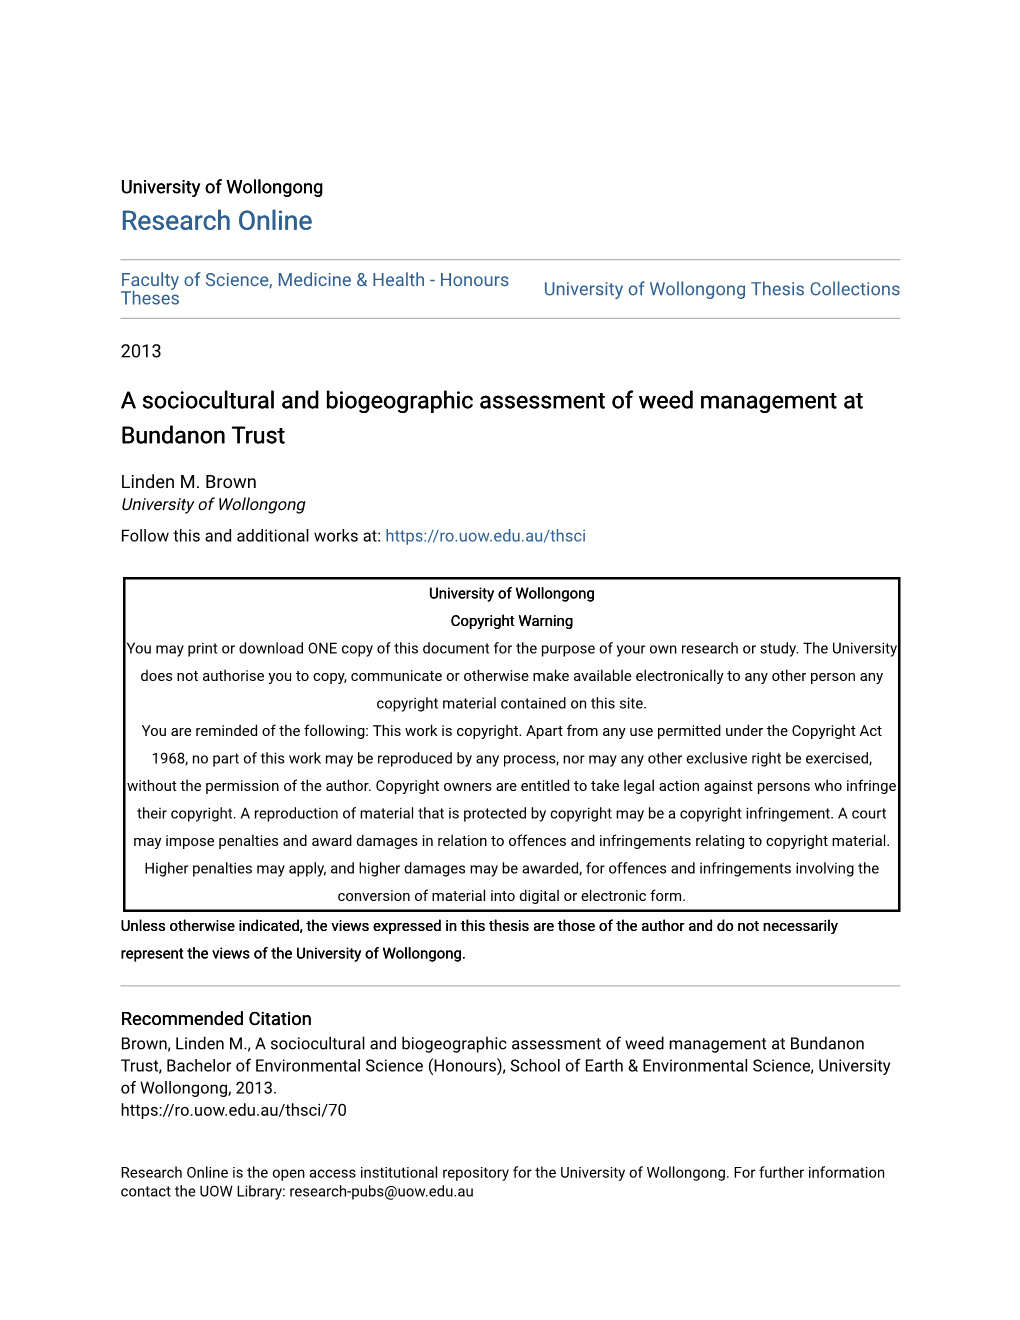 A Sociocultural and Biogeographic Assessment of Weed Management at Bundanon Trust